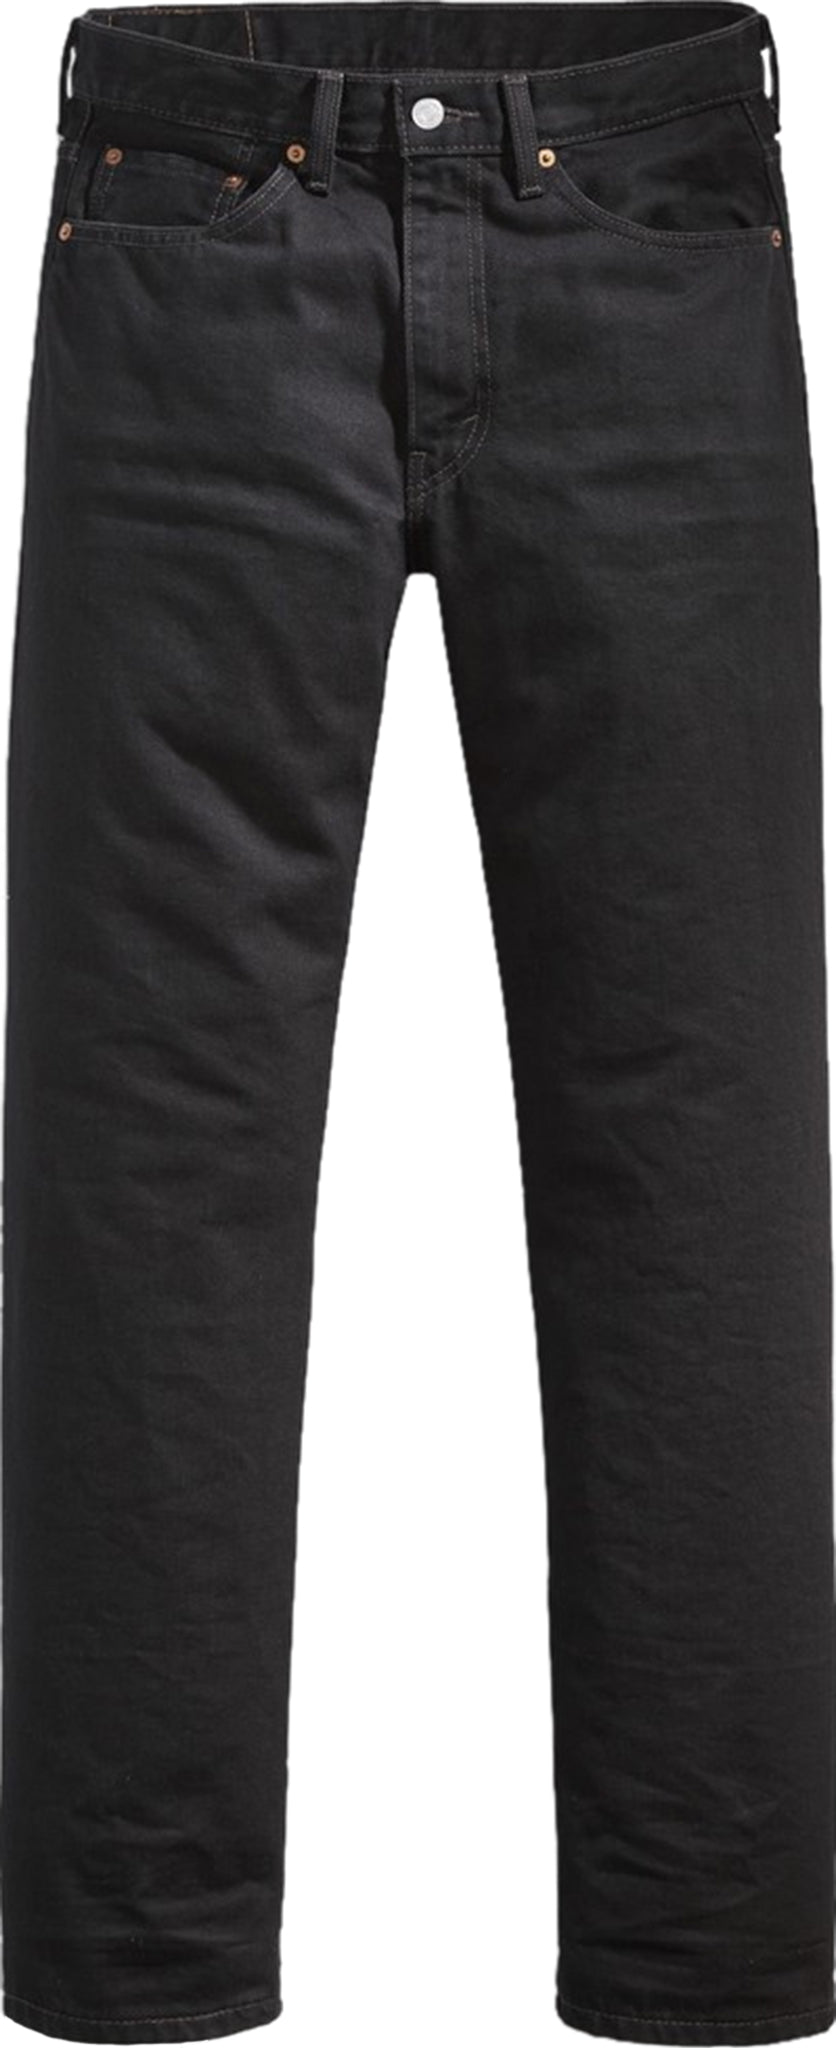 Levi's 550 Relaxed Fit Jeans - Men's | Altitude Sports